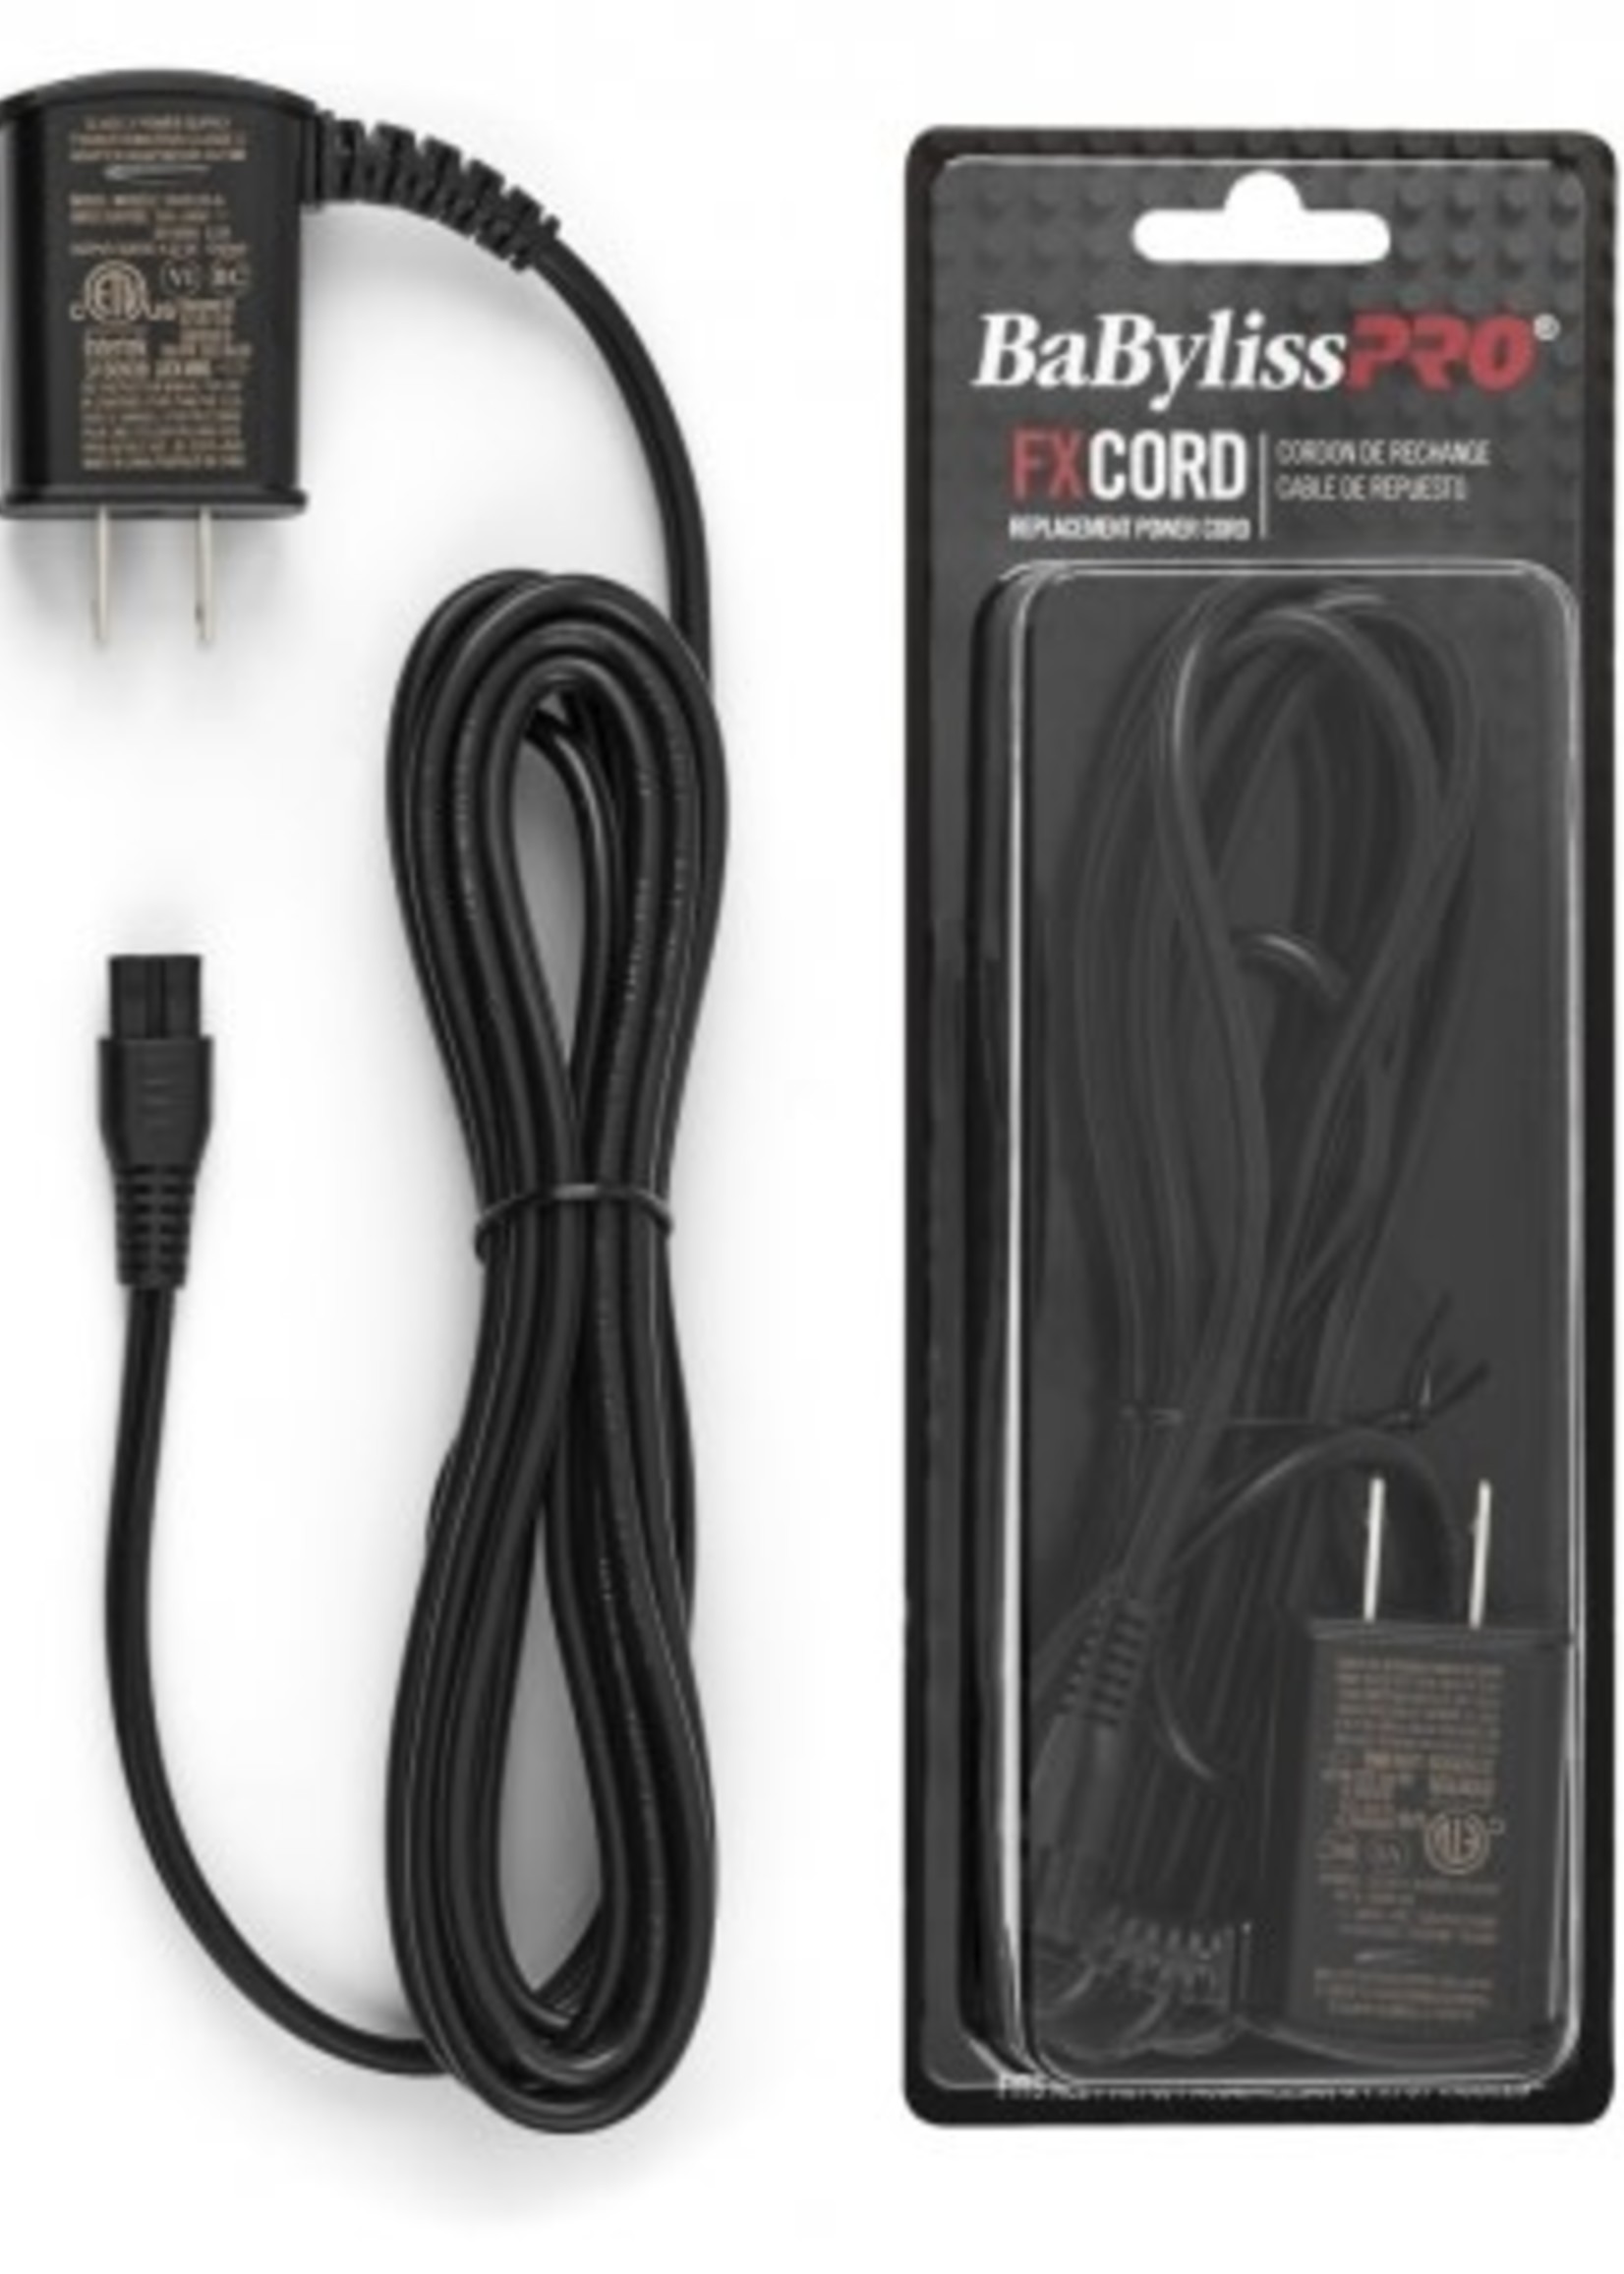 BabylissPro BabylissPro Replacement Cord - FX